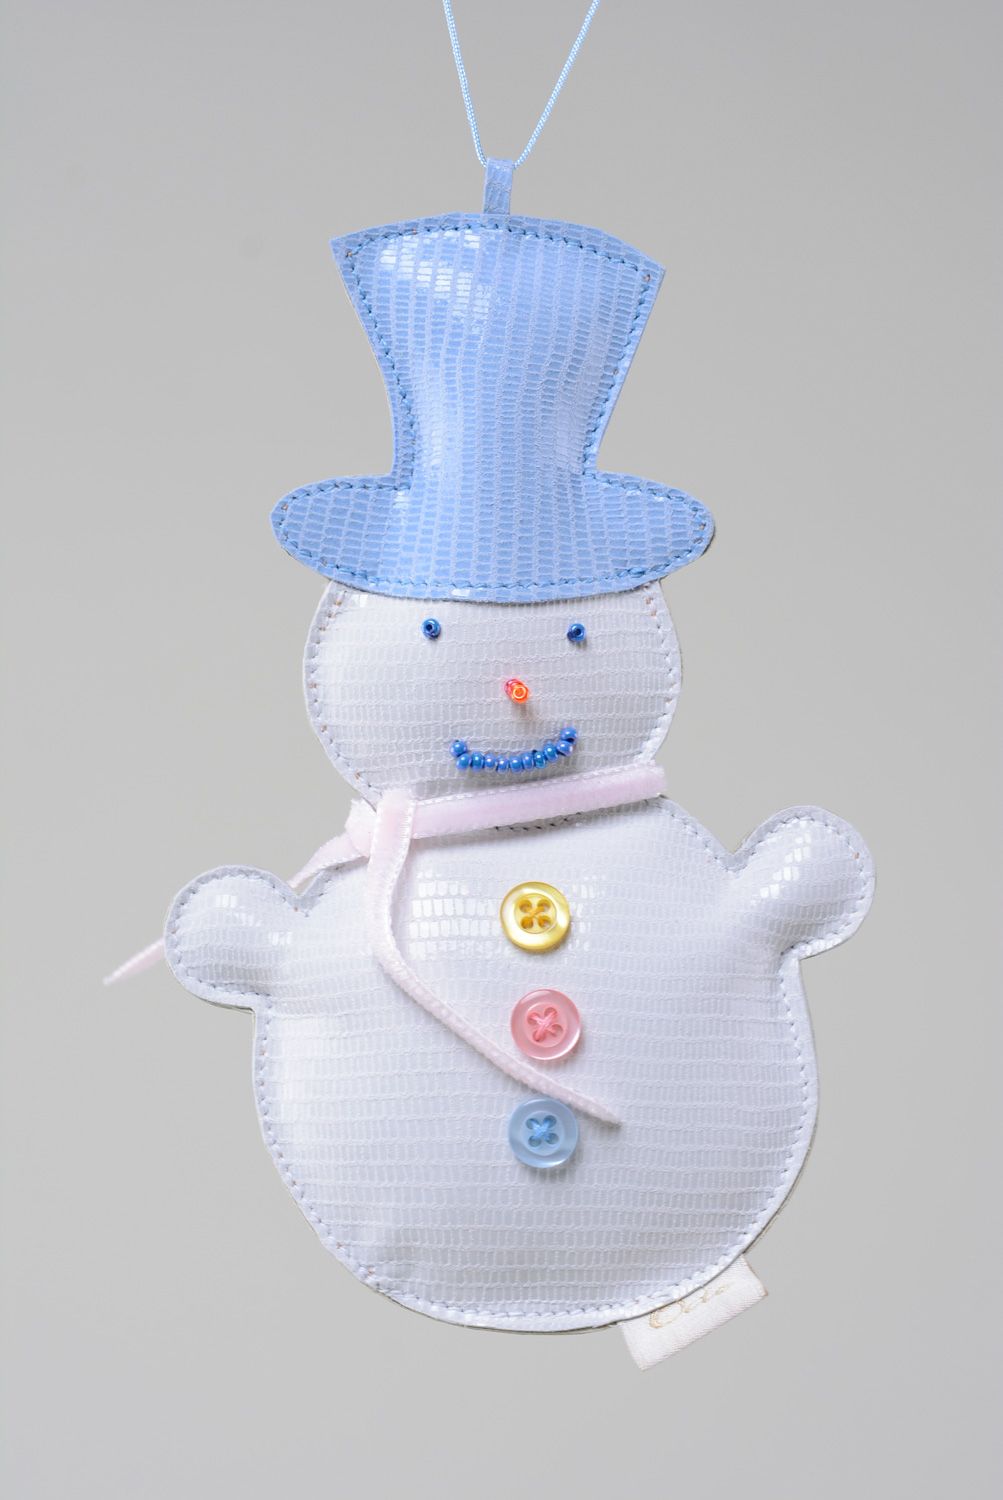 Leather bag charm in the shape of snowman photo 1